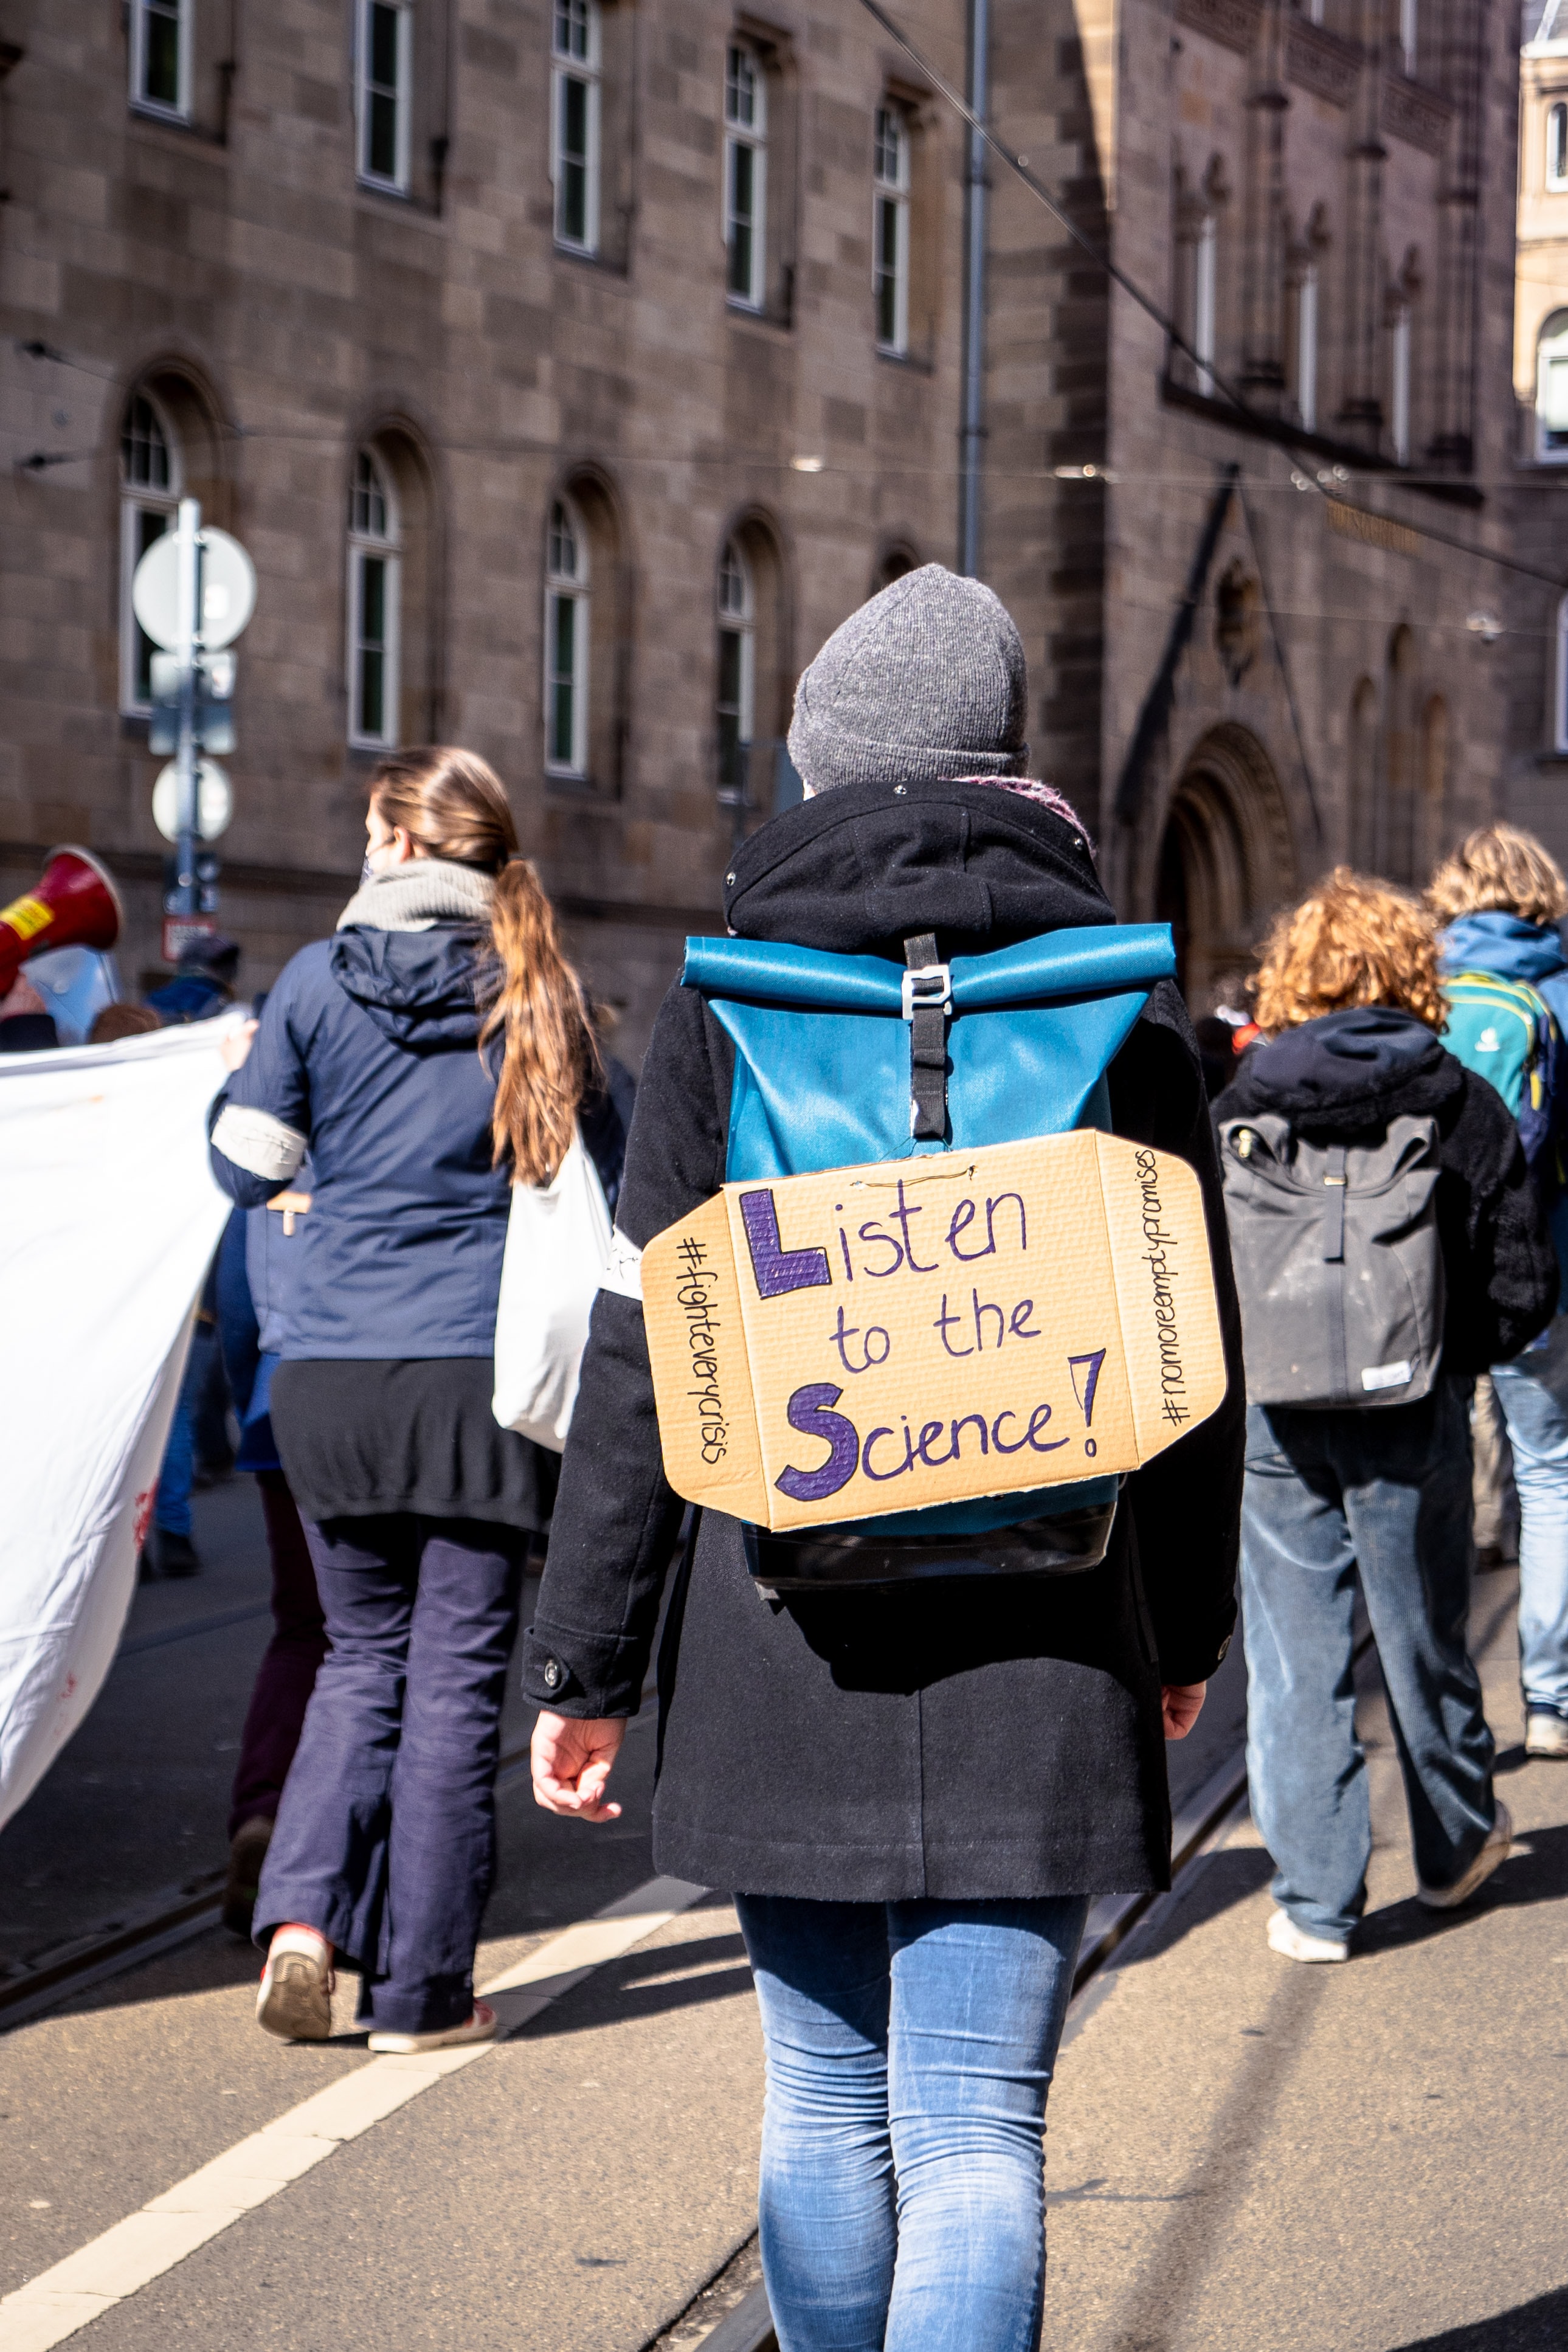 Woman protesting with a sign that says "Listen to the Science!" hanging on her backpack